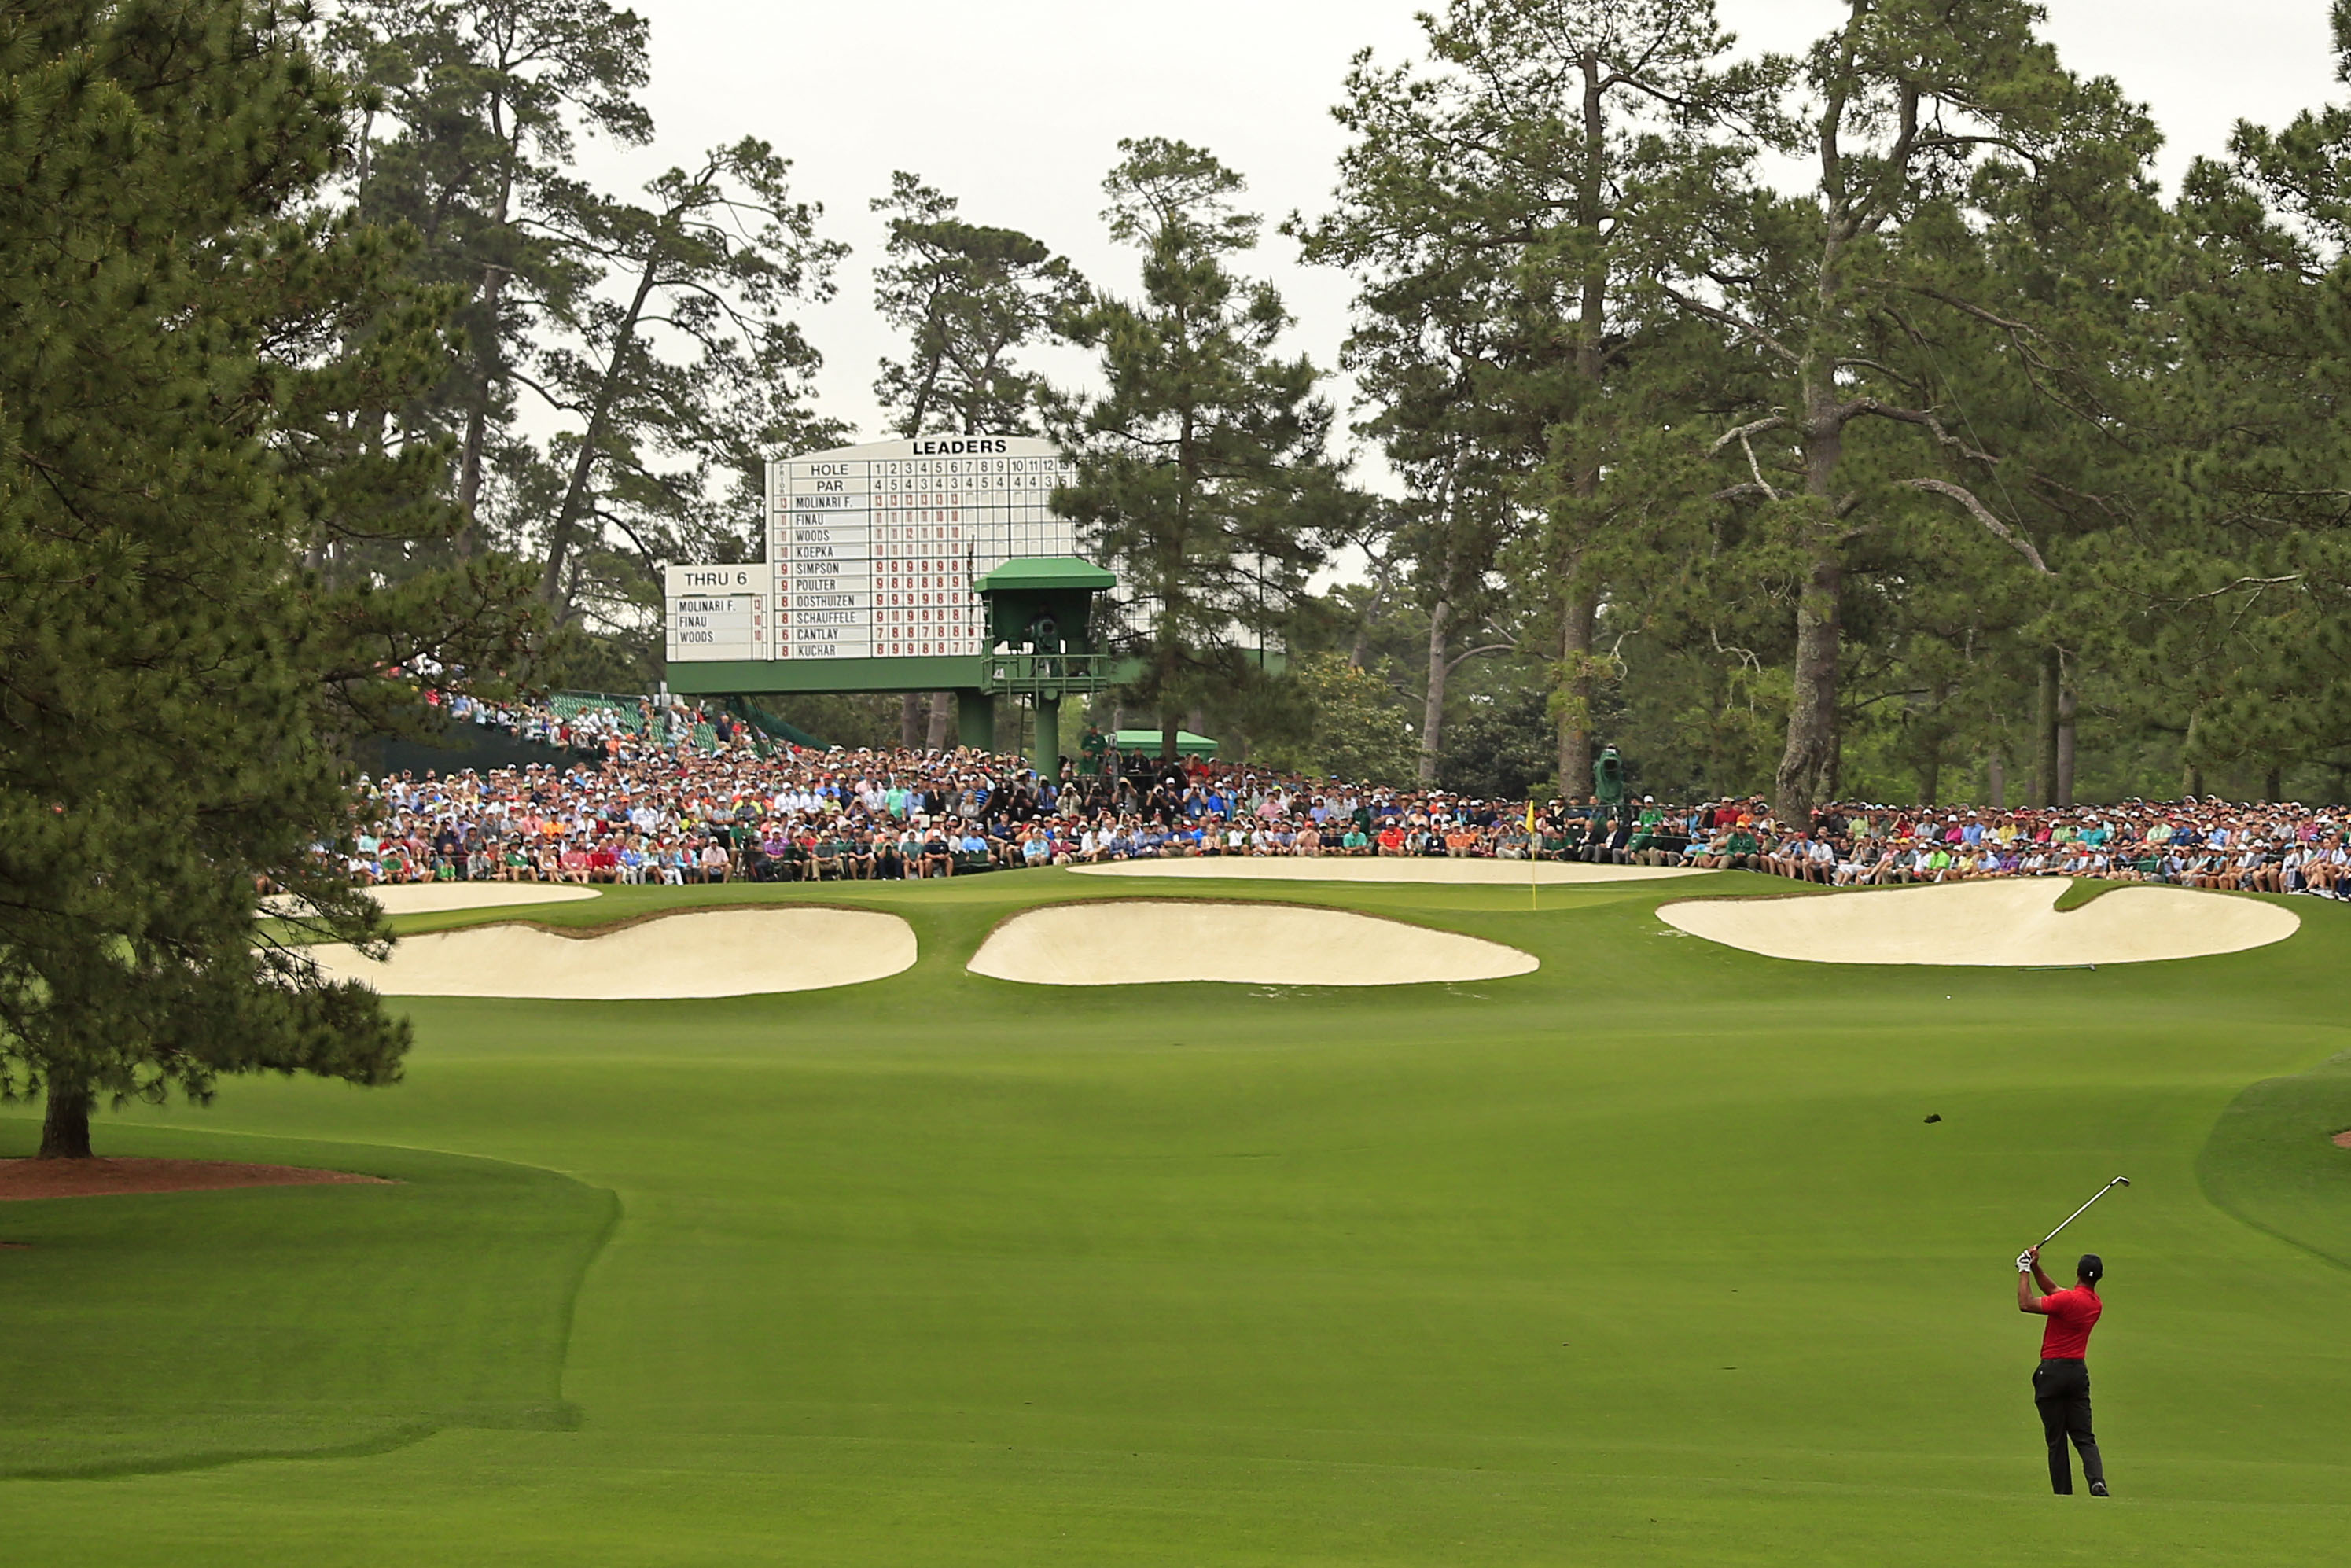 The Best Designed Holes at Augusta National, According to Masters Legend